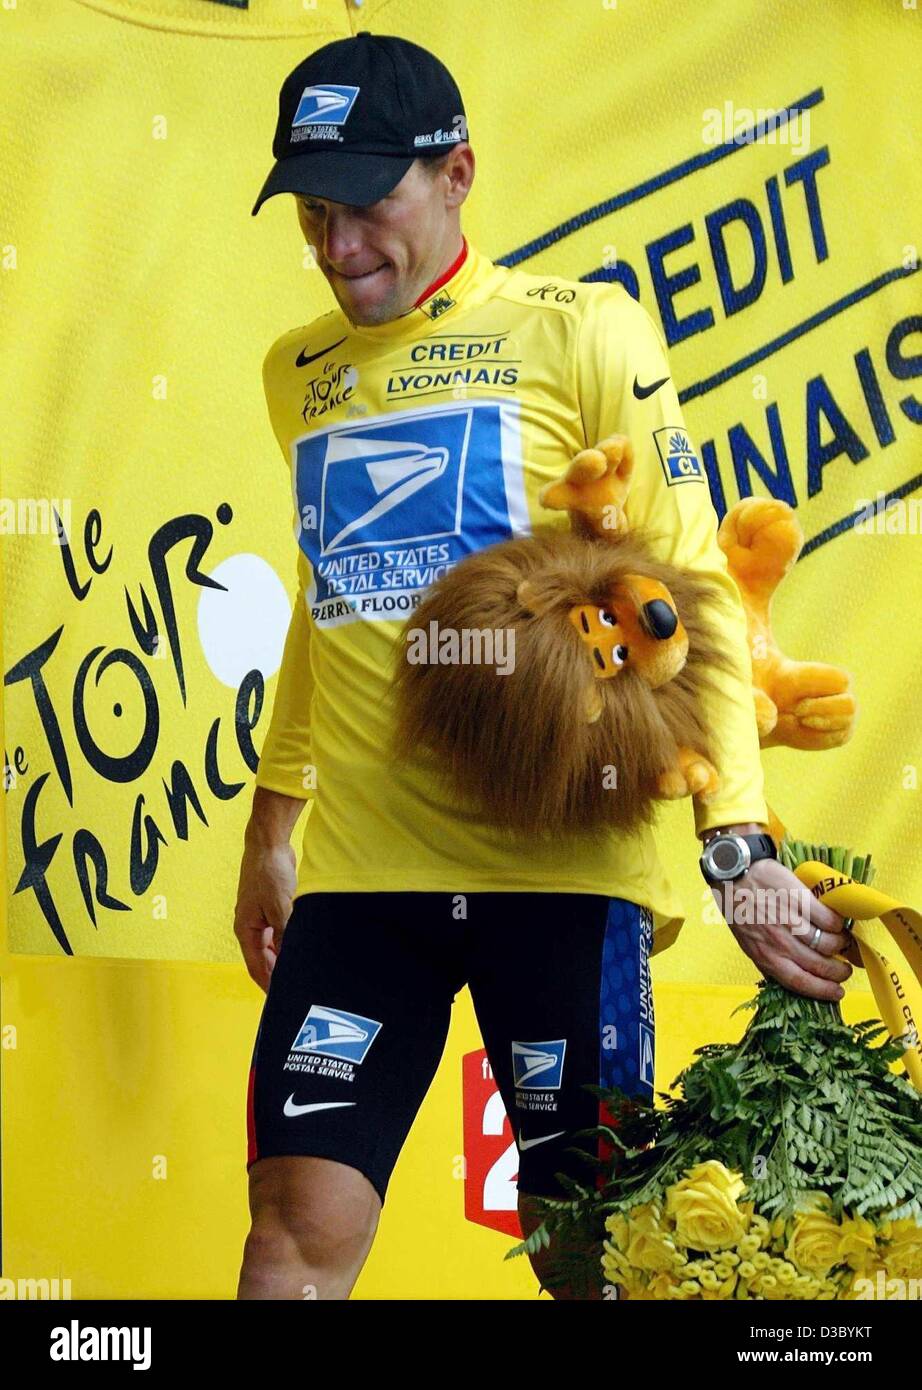 (dpa) - US Postal-Berry Floor's Lance Armstrong from the US leaves the podium after putting on the overall leader's yellow jersey after the 16th stage of the 2003 Tour de France cycling race in Bayonne, France, 23 July 2003. The 197.5km long 16th stage of the world's biggest cycling race led the cyc Stock Photo